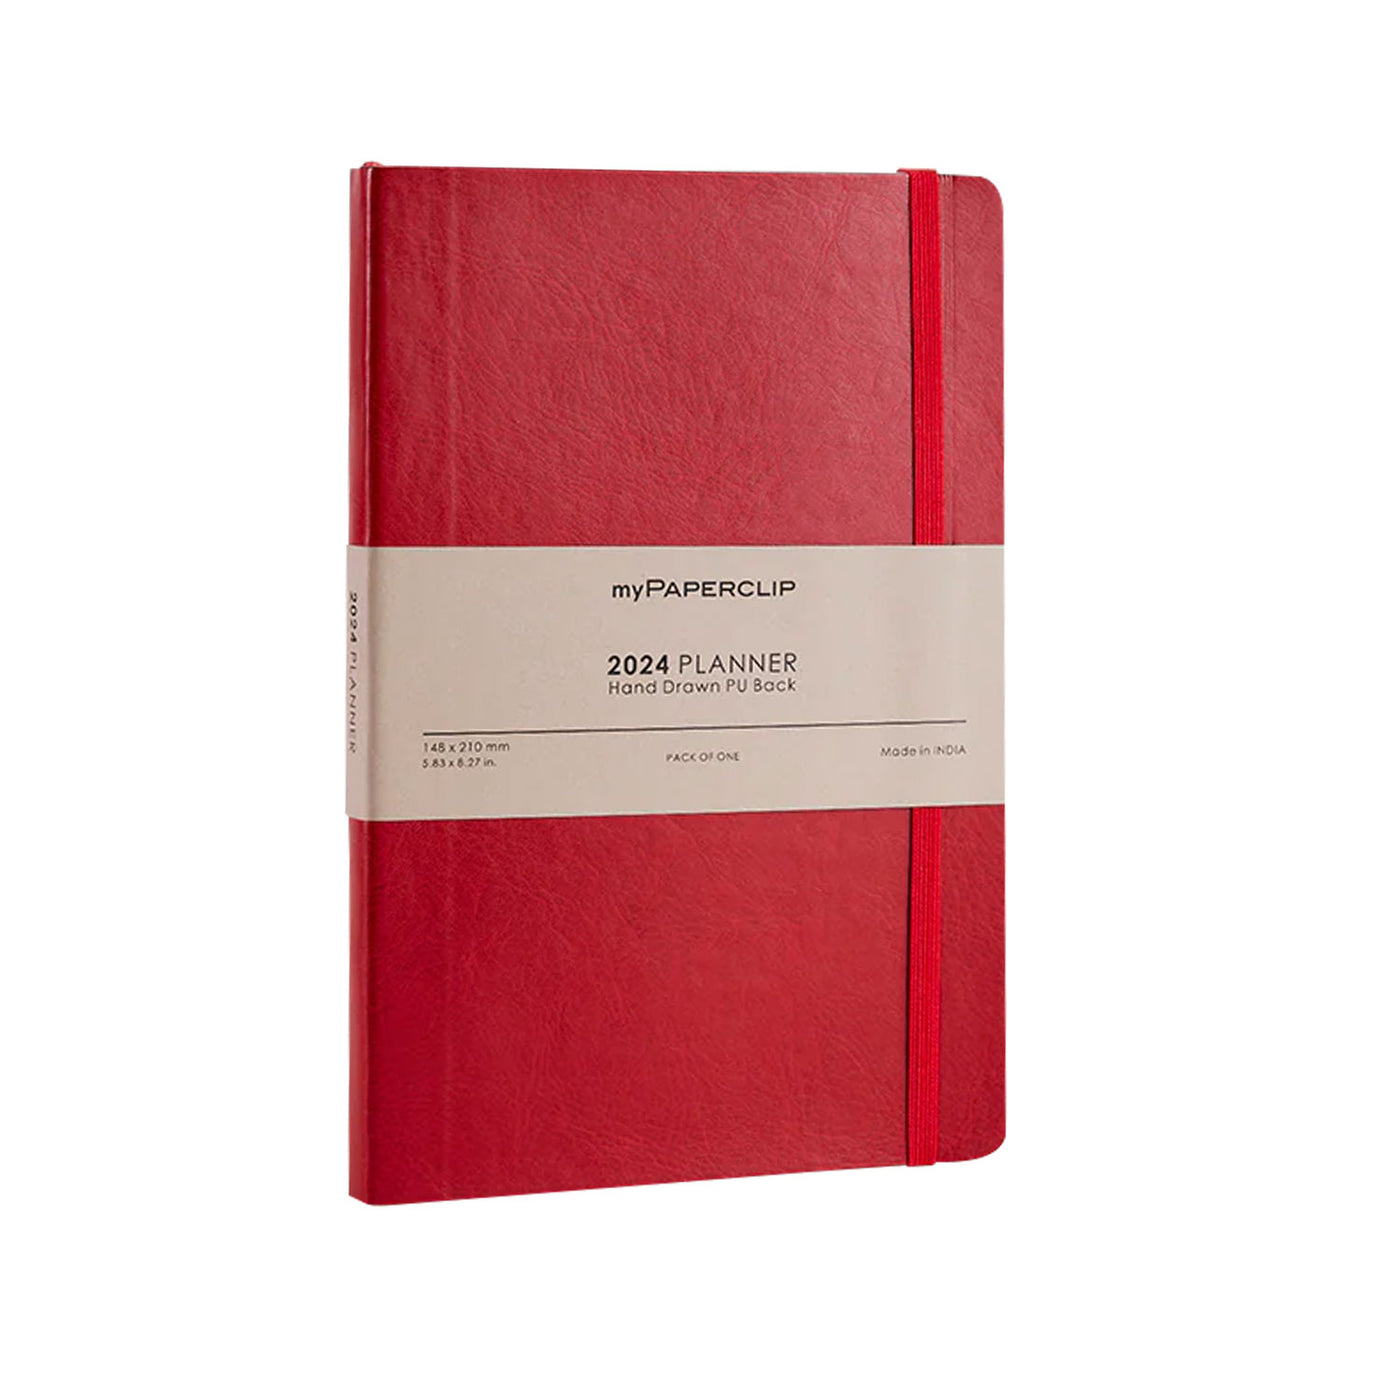 myPAPERCLIP R2 2024 Weekly Planner - Red